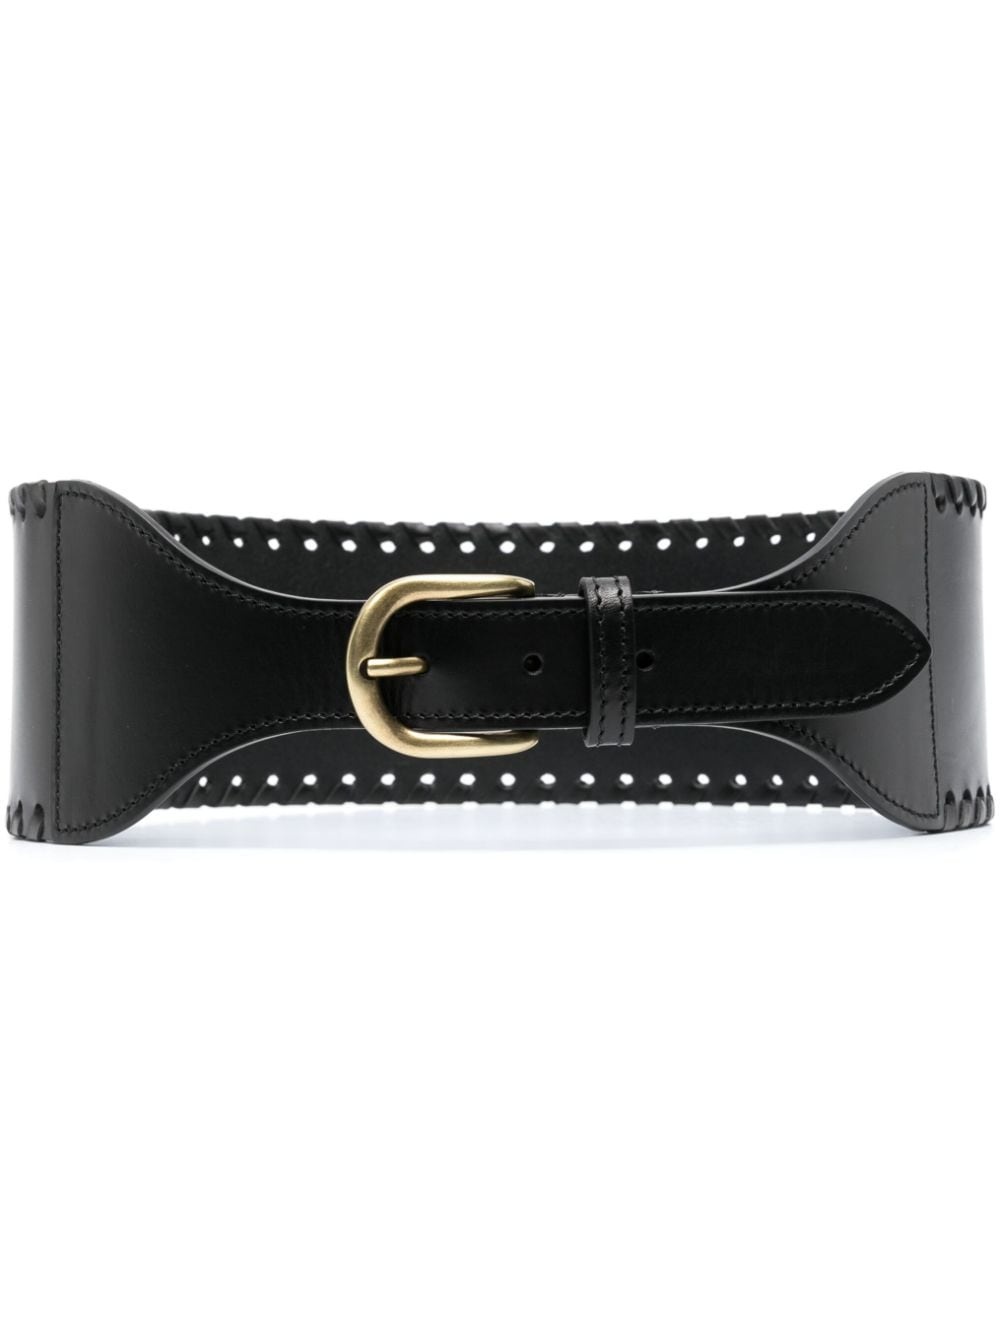 Woma leather belt - 1